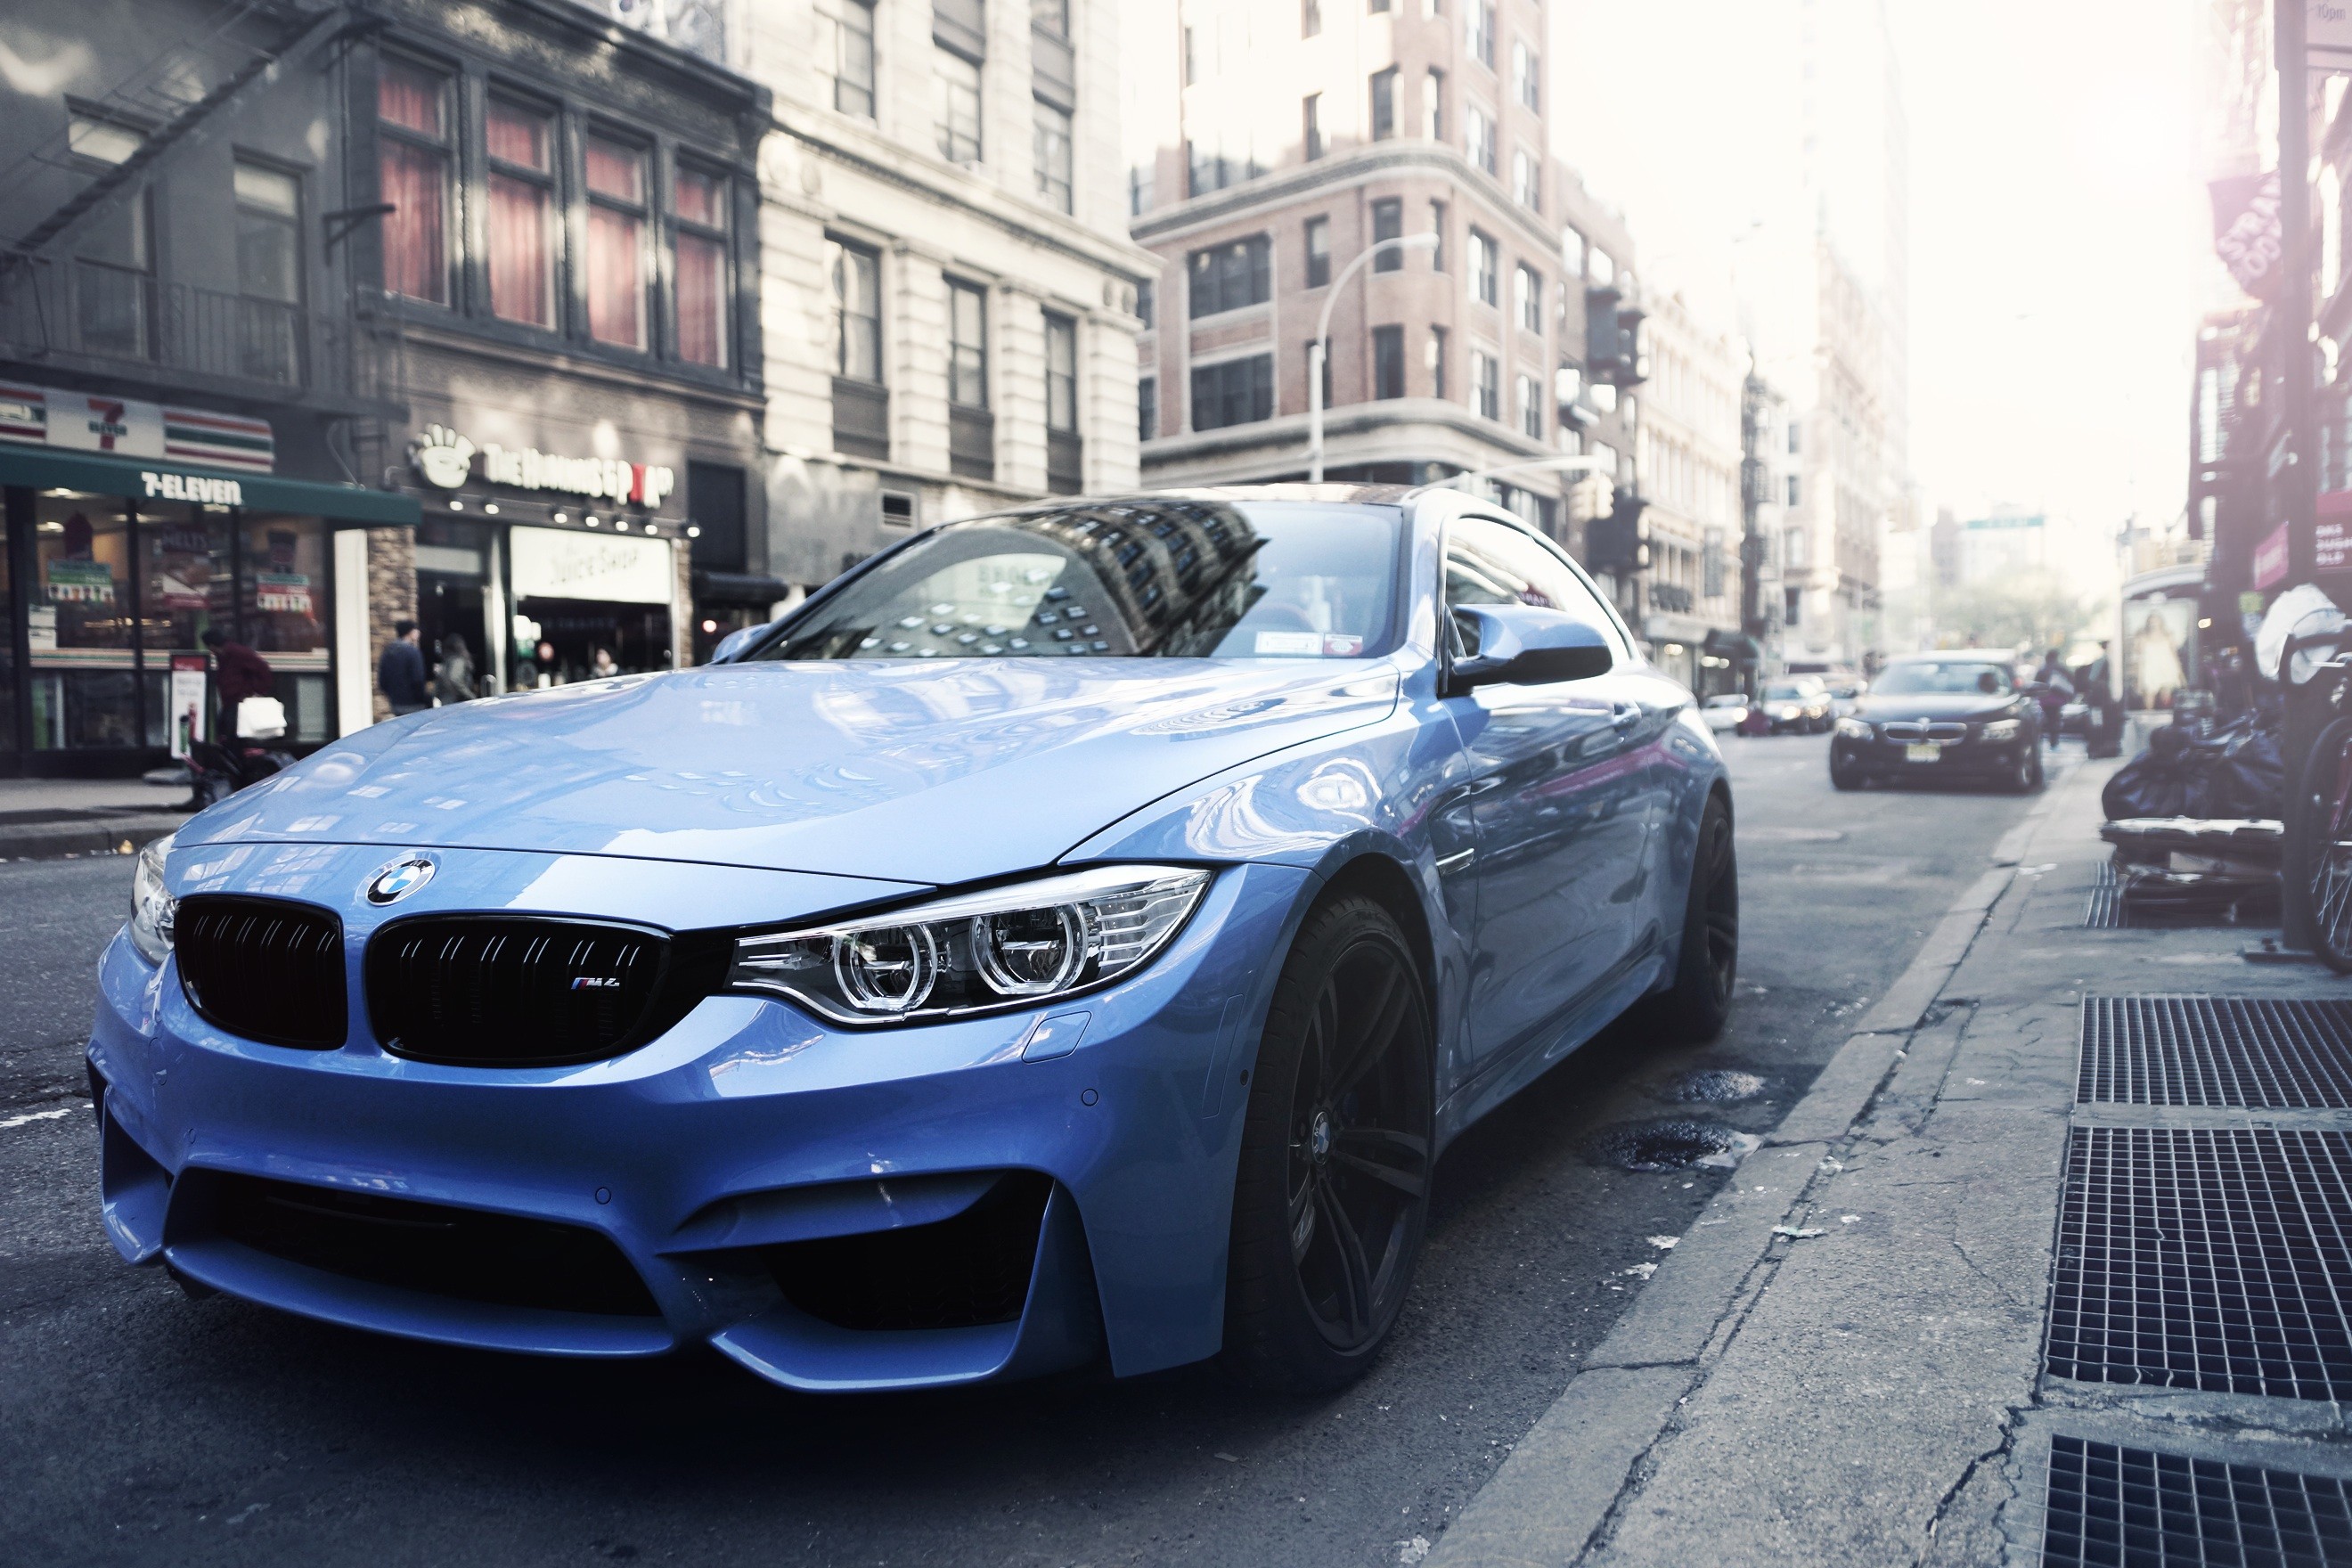 BMW M4 Coupe, BMW, City, Car, Vehicle, German cars Wallpaper HD / Desktop and Mobile Background